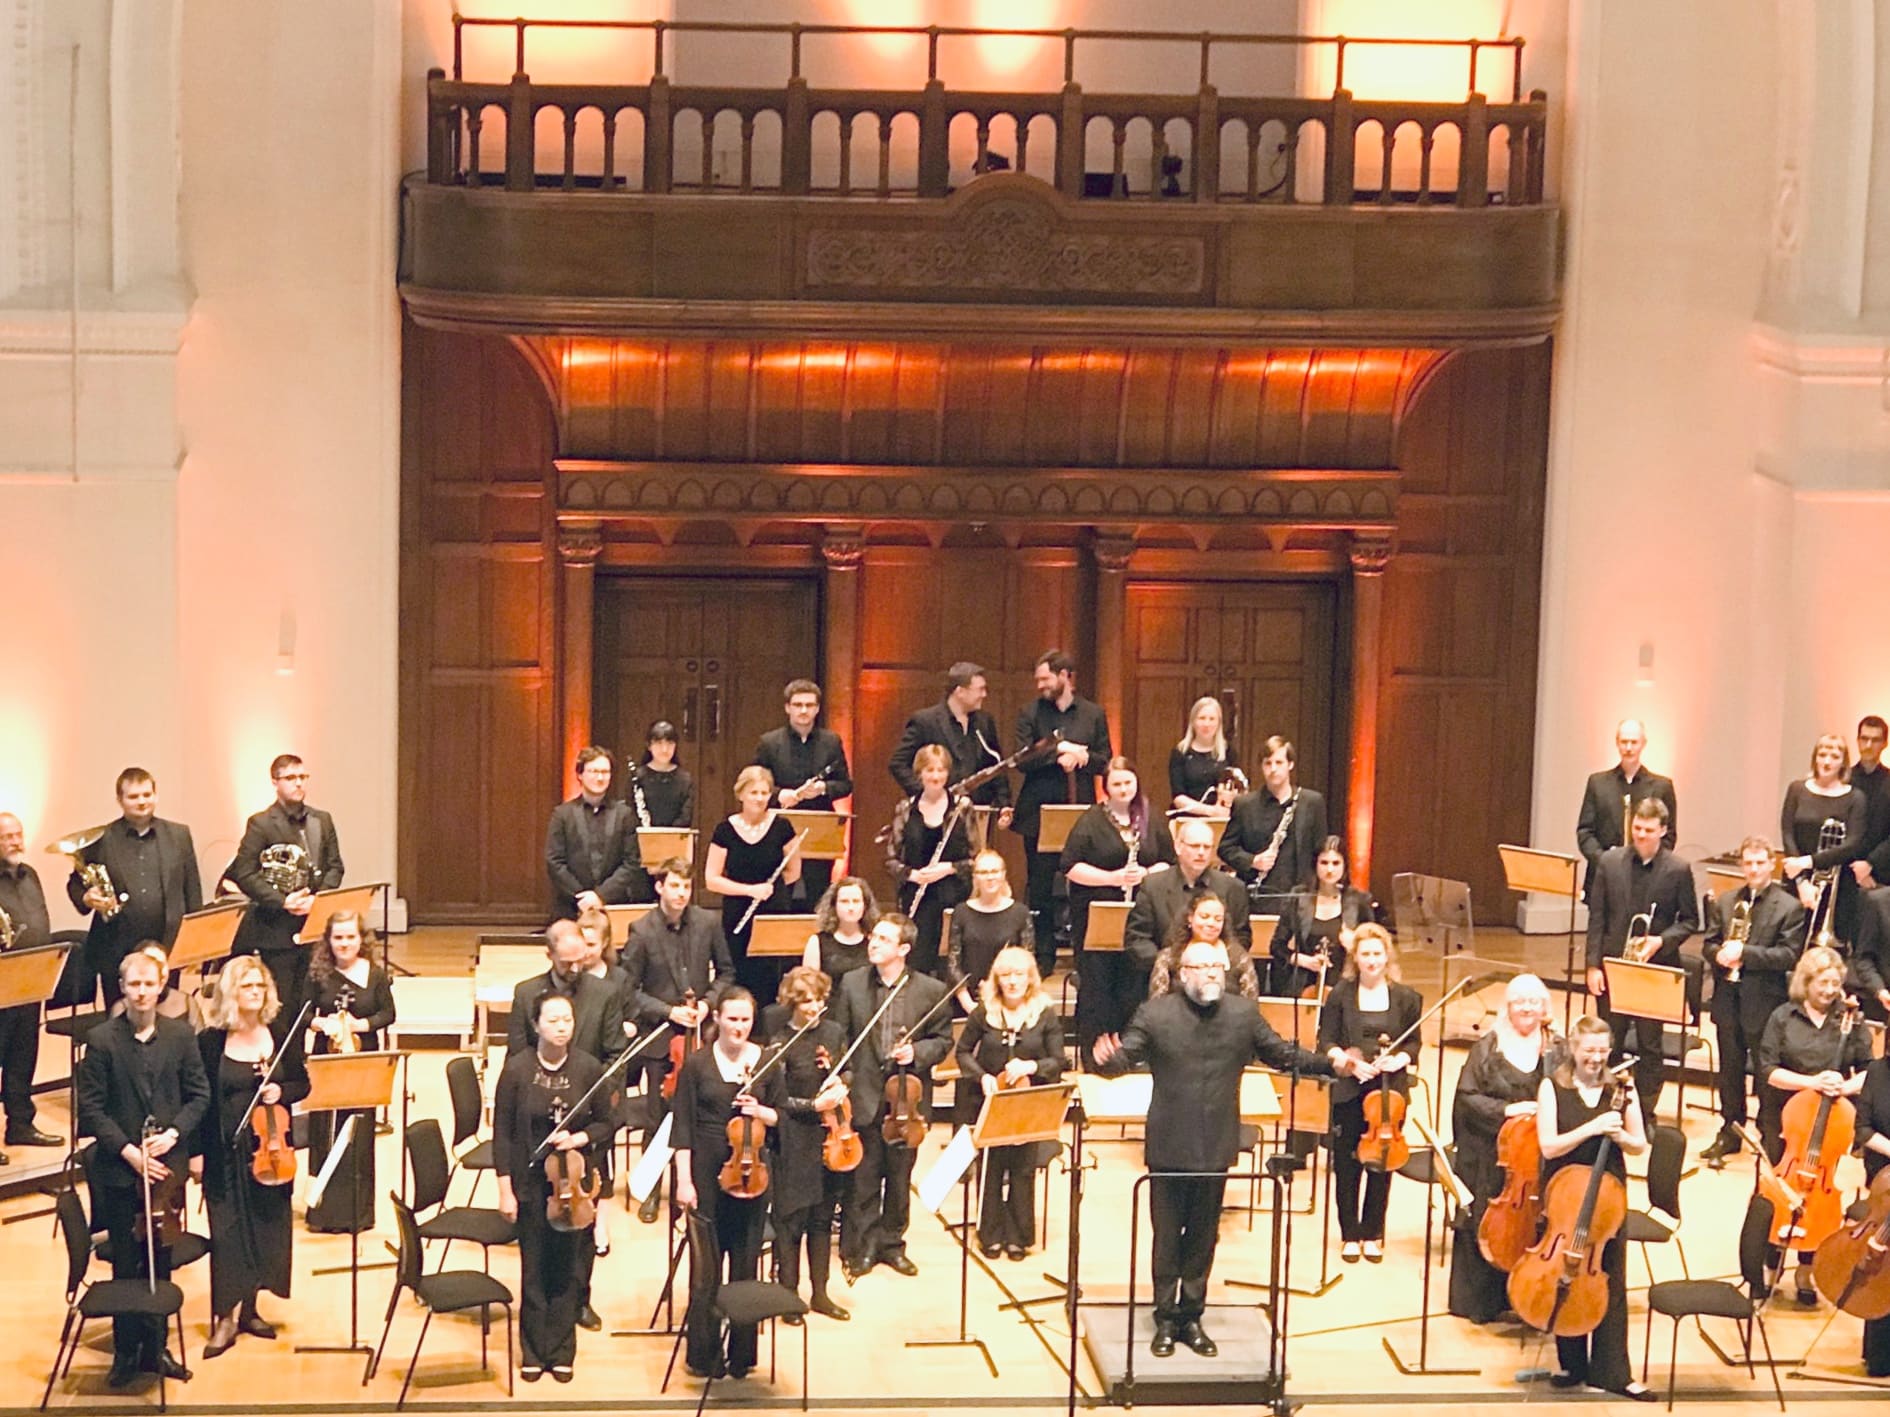 Concert Review – Musical Opinion on ESO at Cadogan Hall